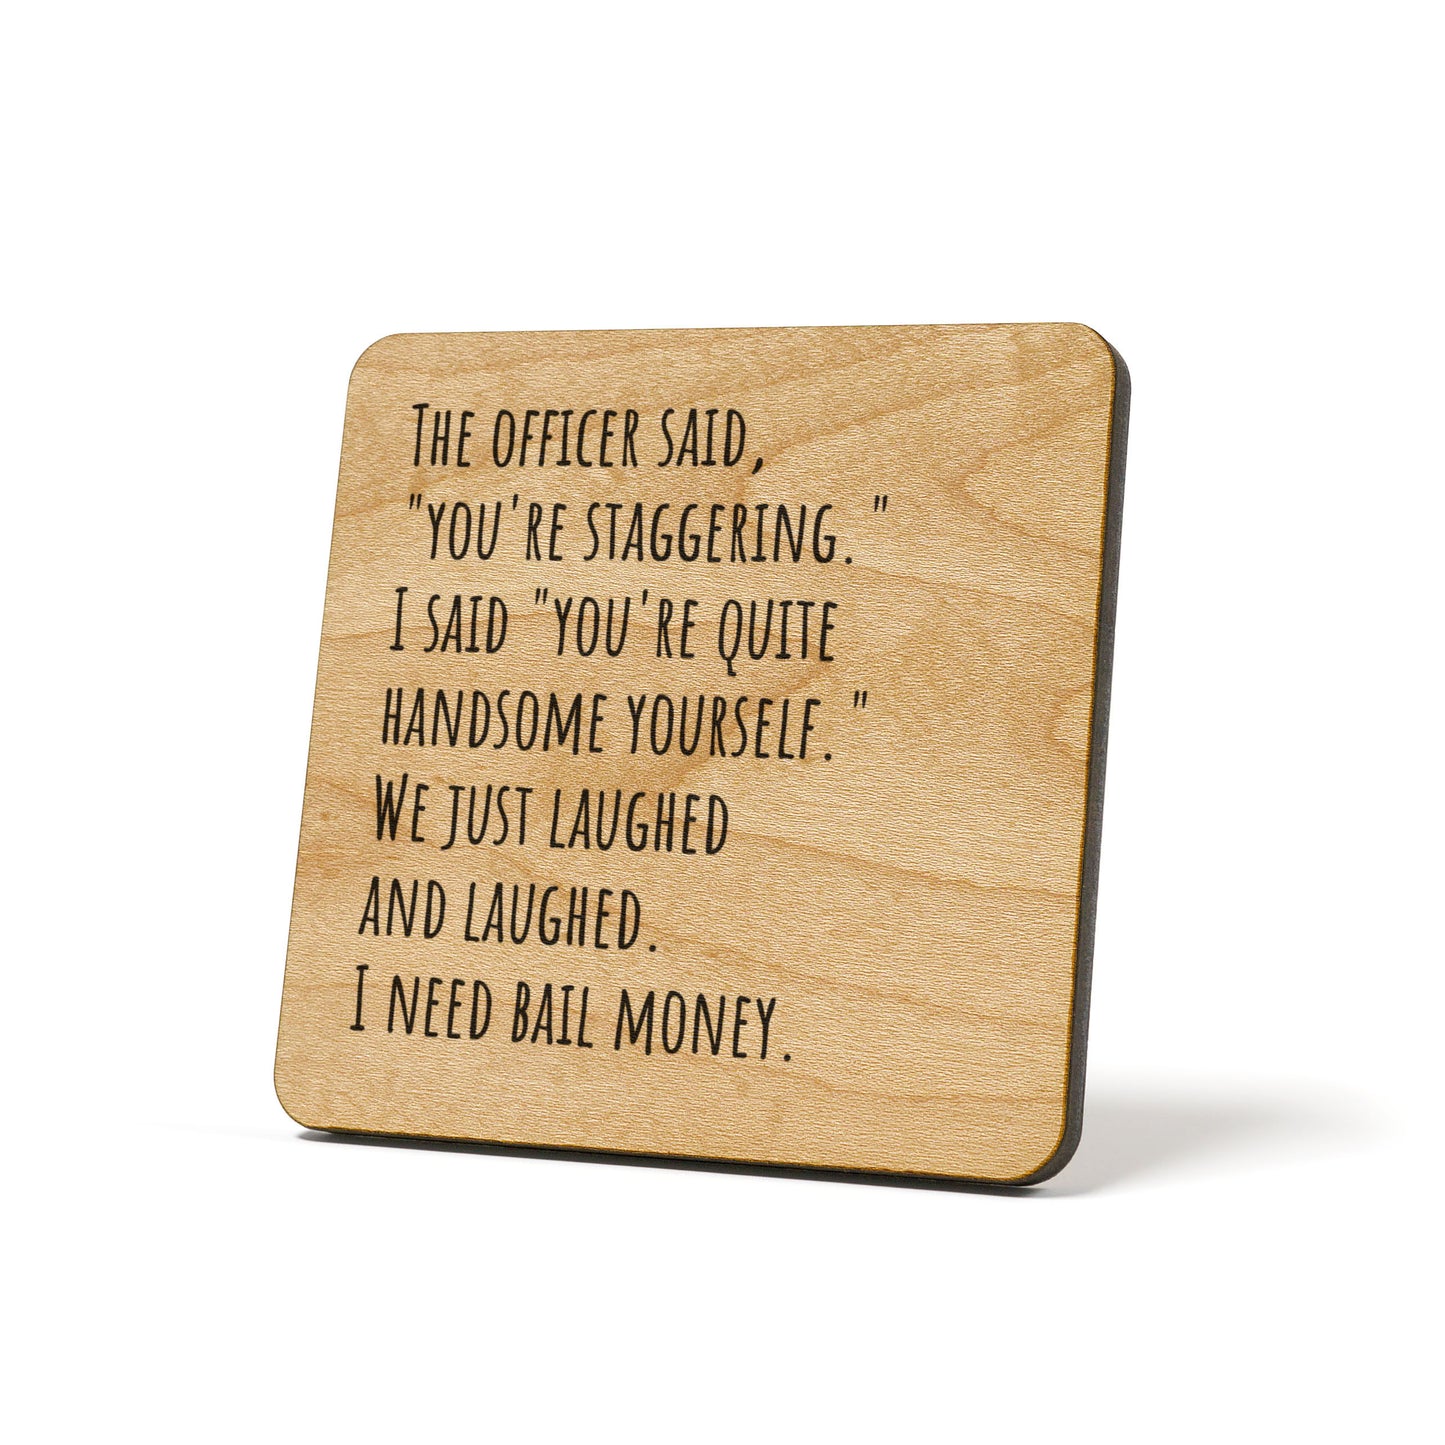 The officer said, "you're staggering." I said..... Quote Coaster